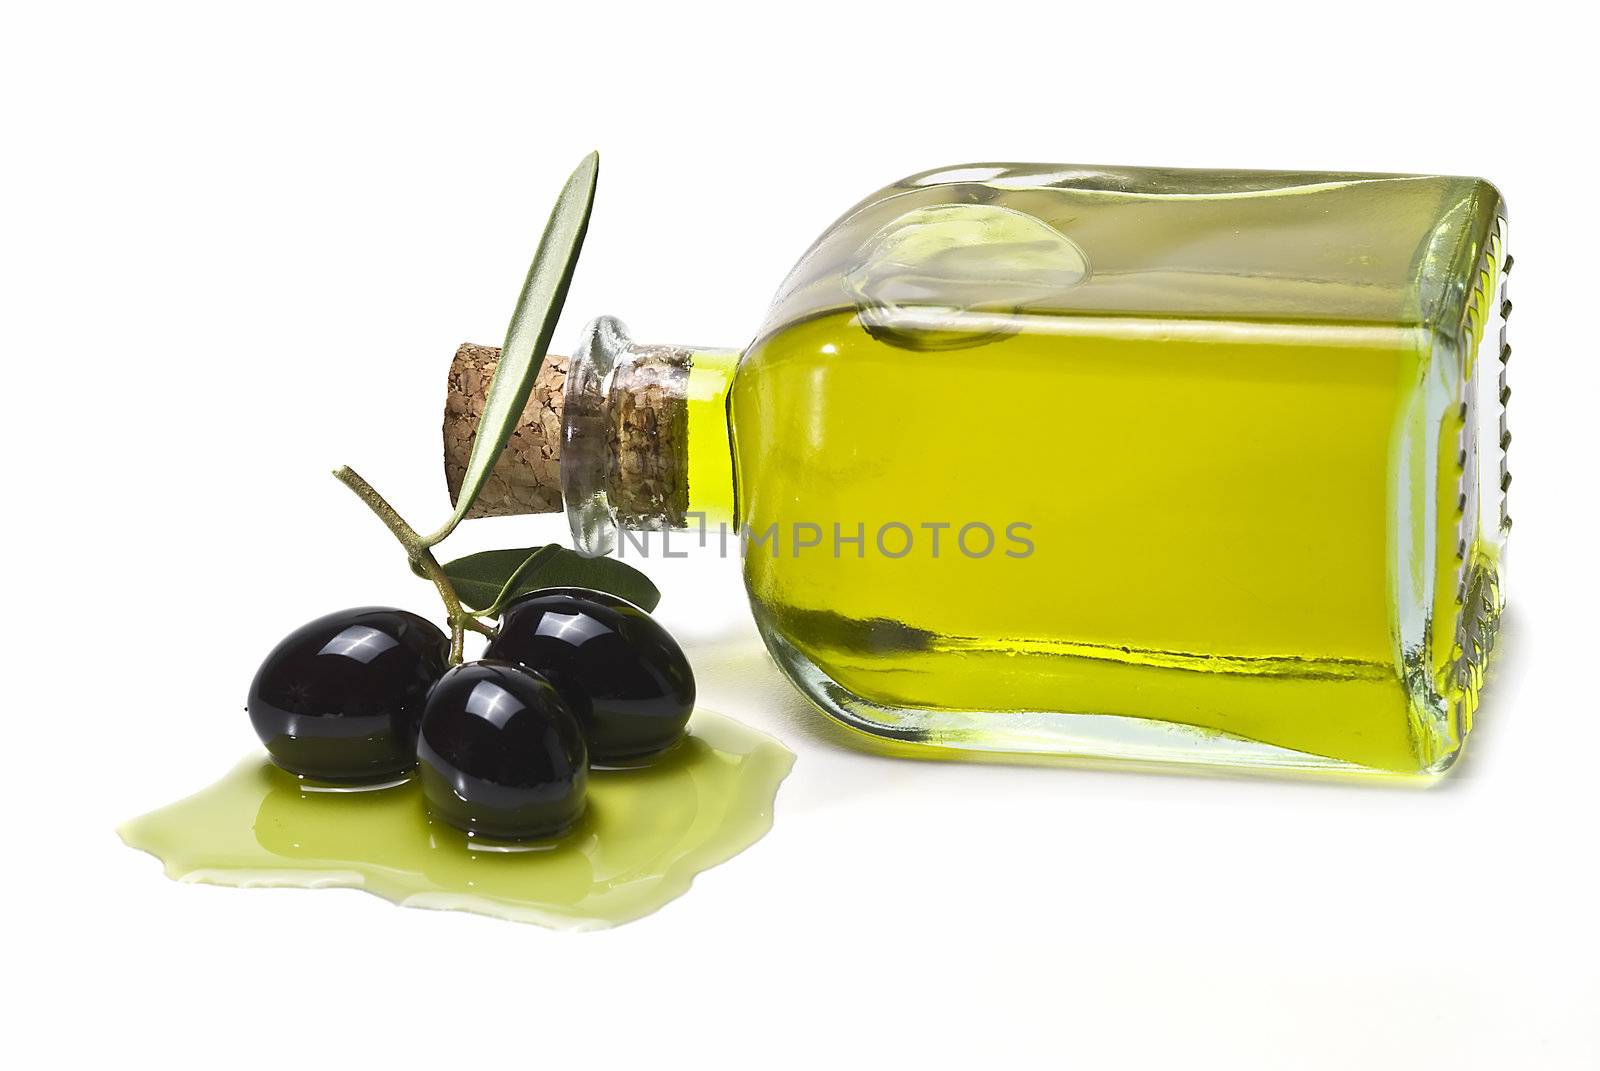 Olives and olive oil. by angelsimon